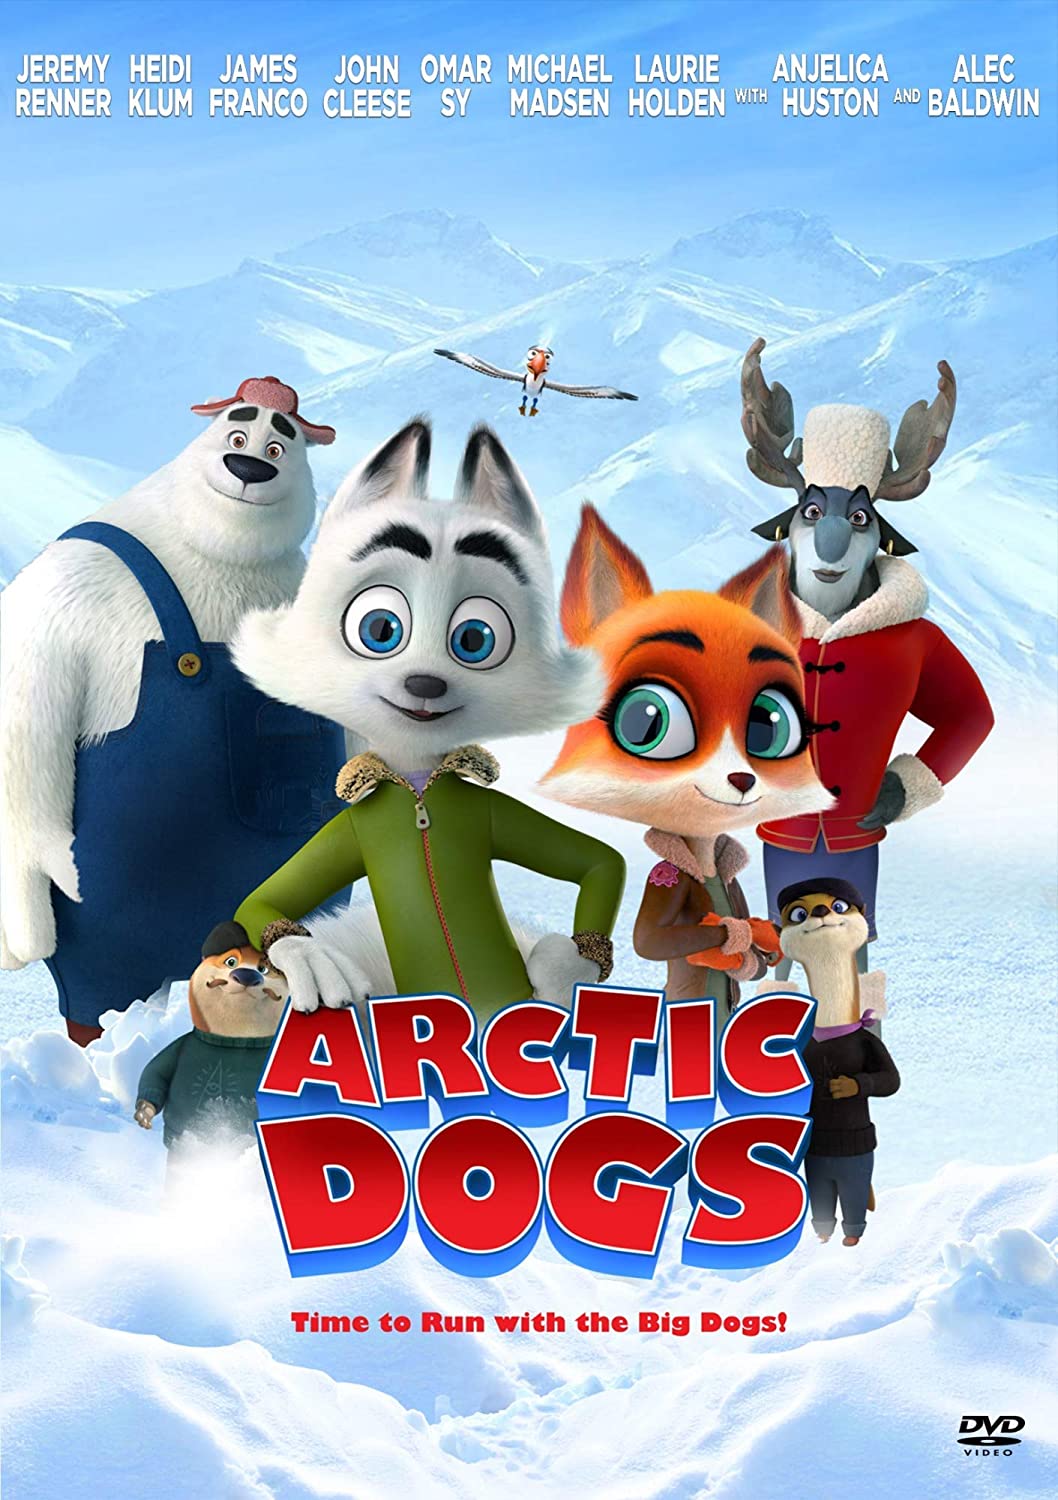 Arctic Dogs DVD Cover.